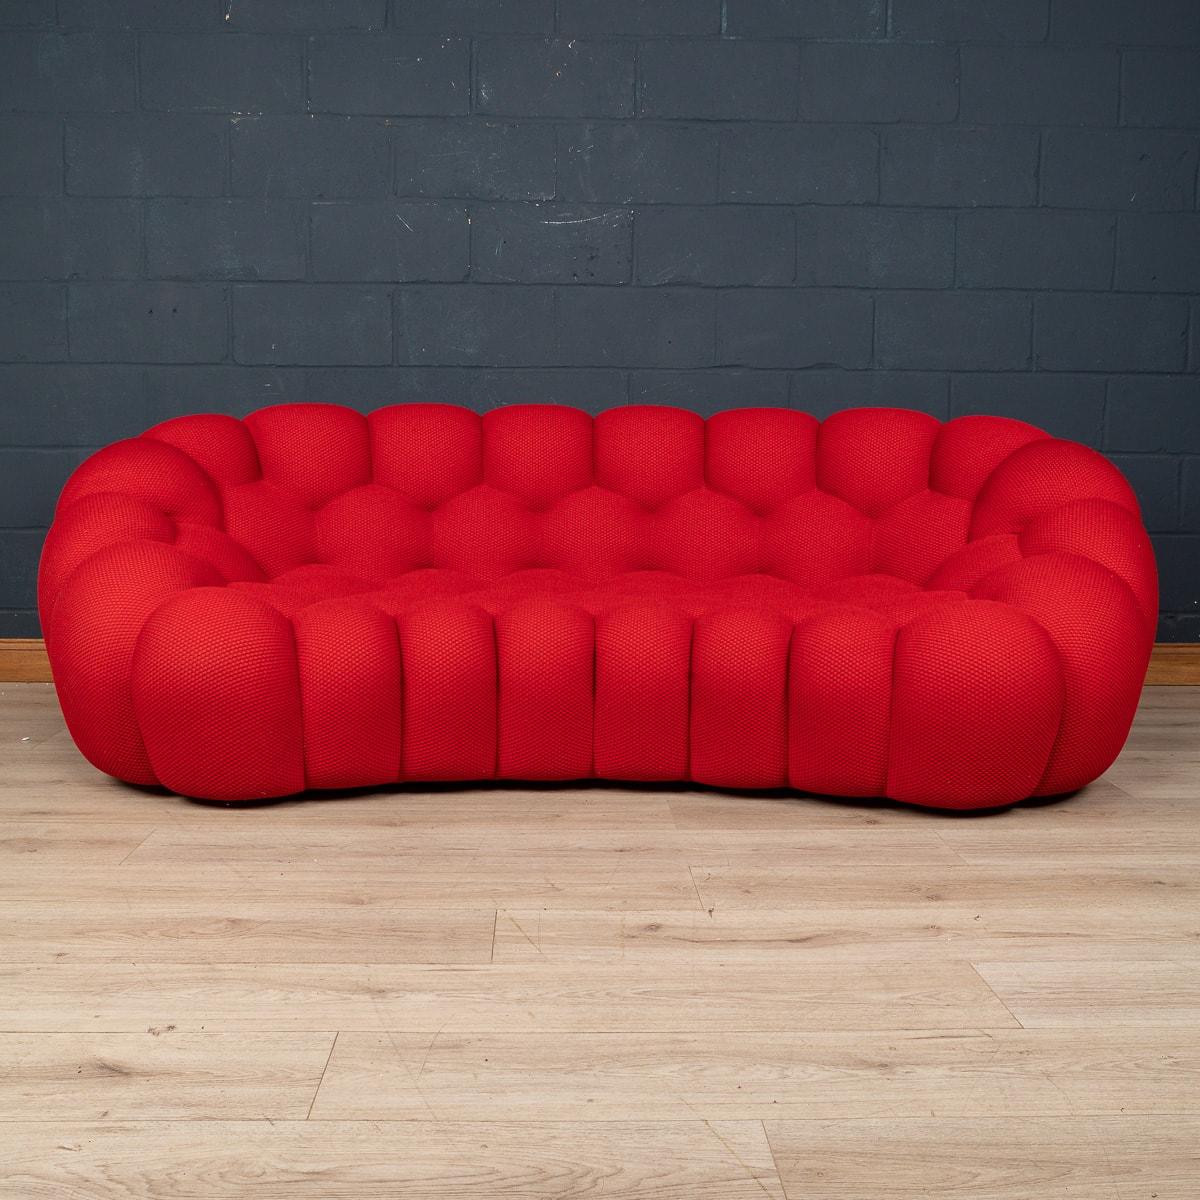 A beautiful curved “Bubble“ sofa by Roche Bobois. Created by Sacha Lakic, a designer with a passion for cutting-edge technology, Bubble expresses the balance between innovation, function and emotion. Inspired by natural and mineral forms and